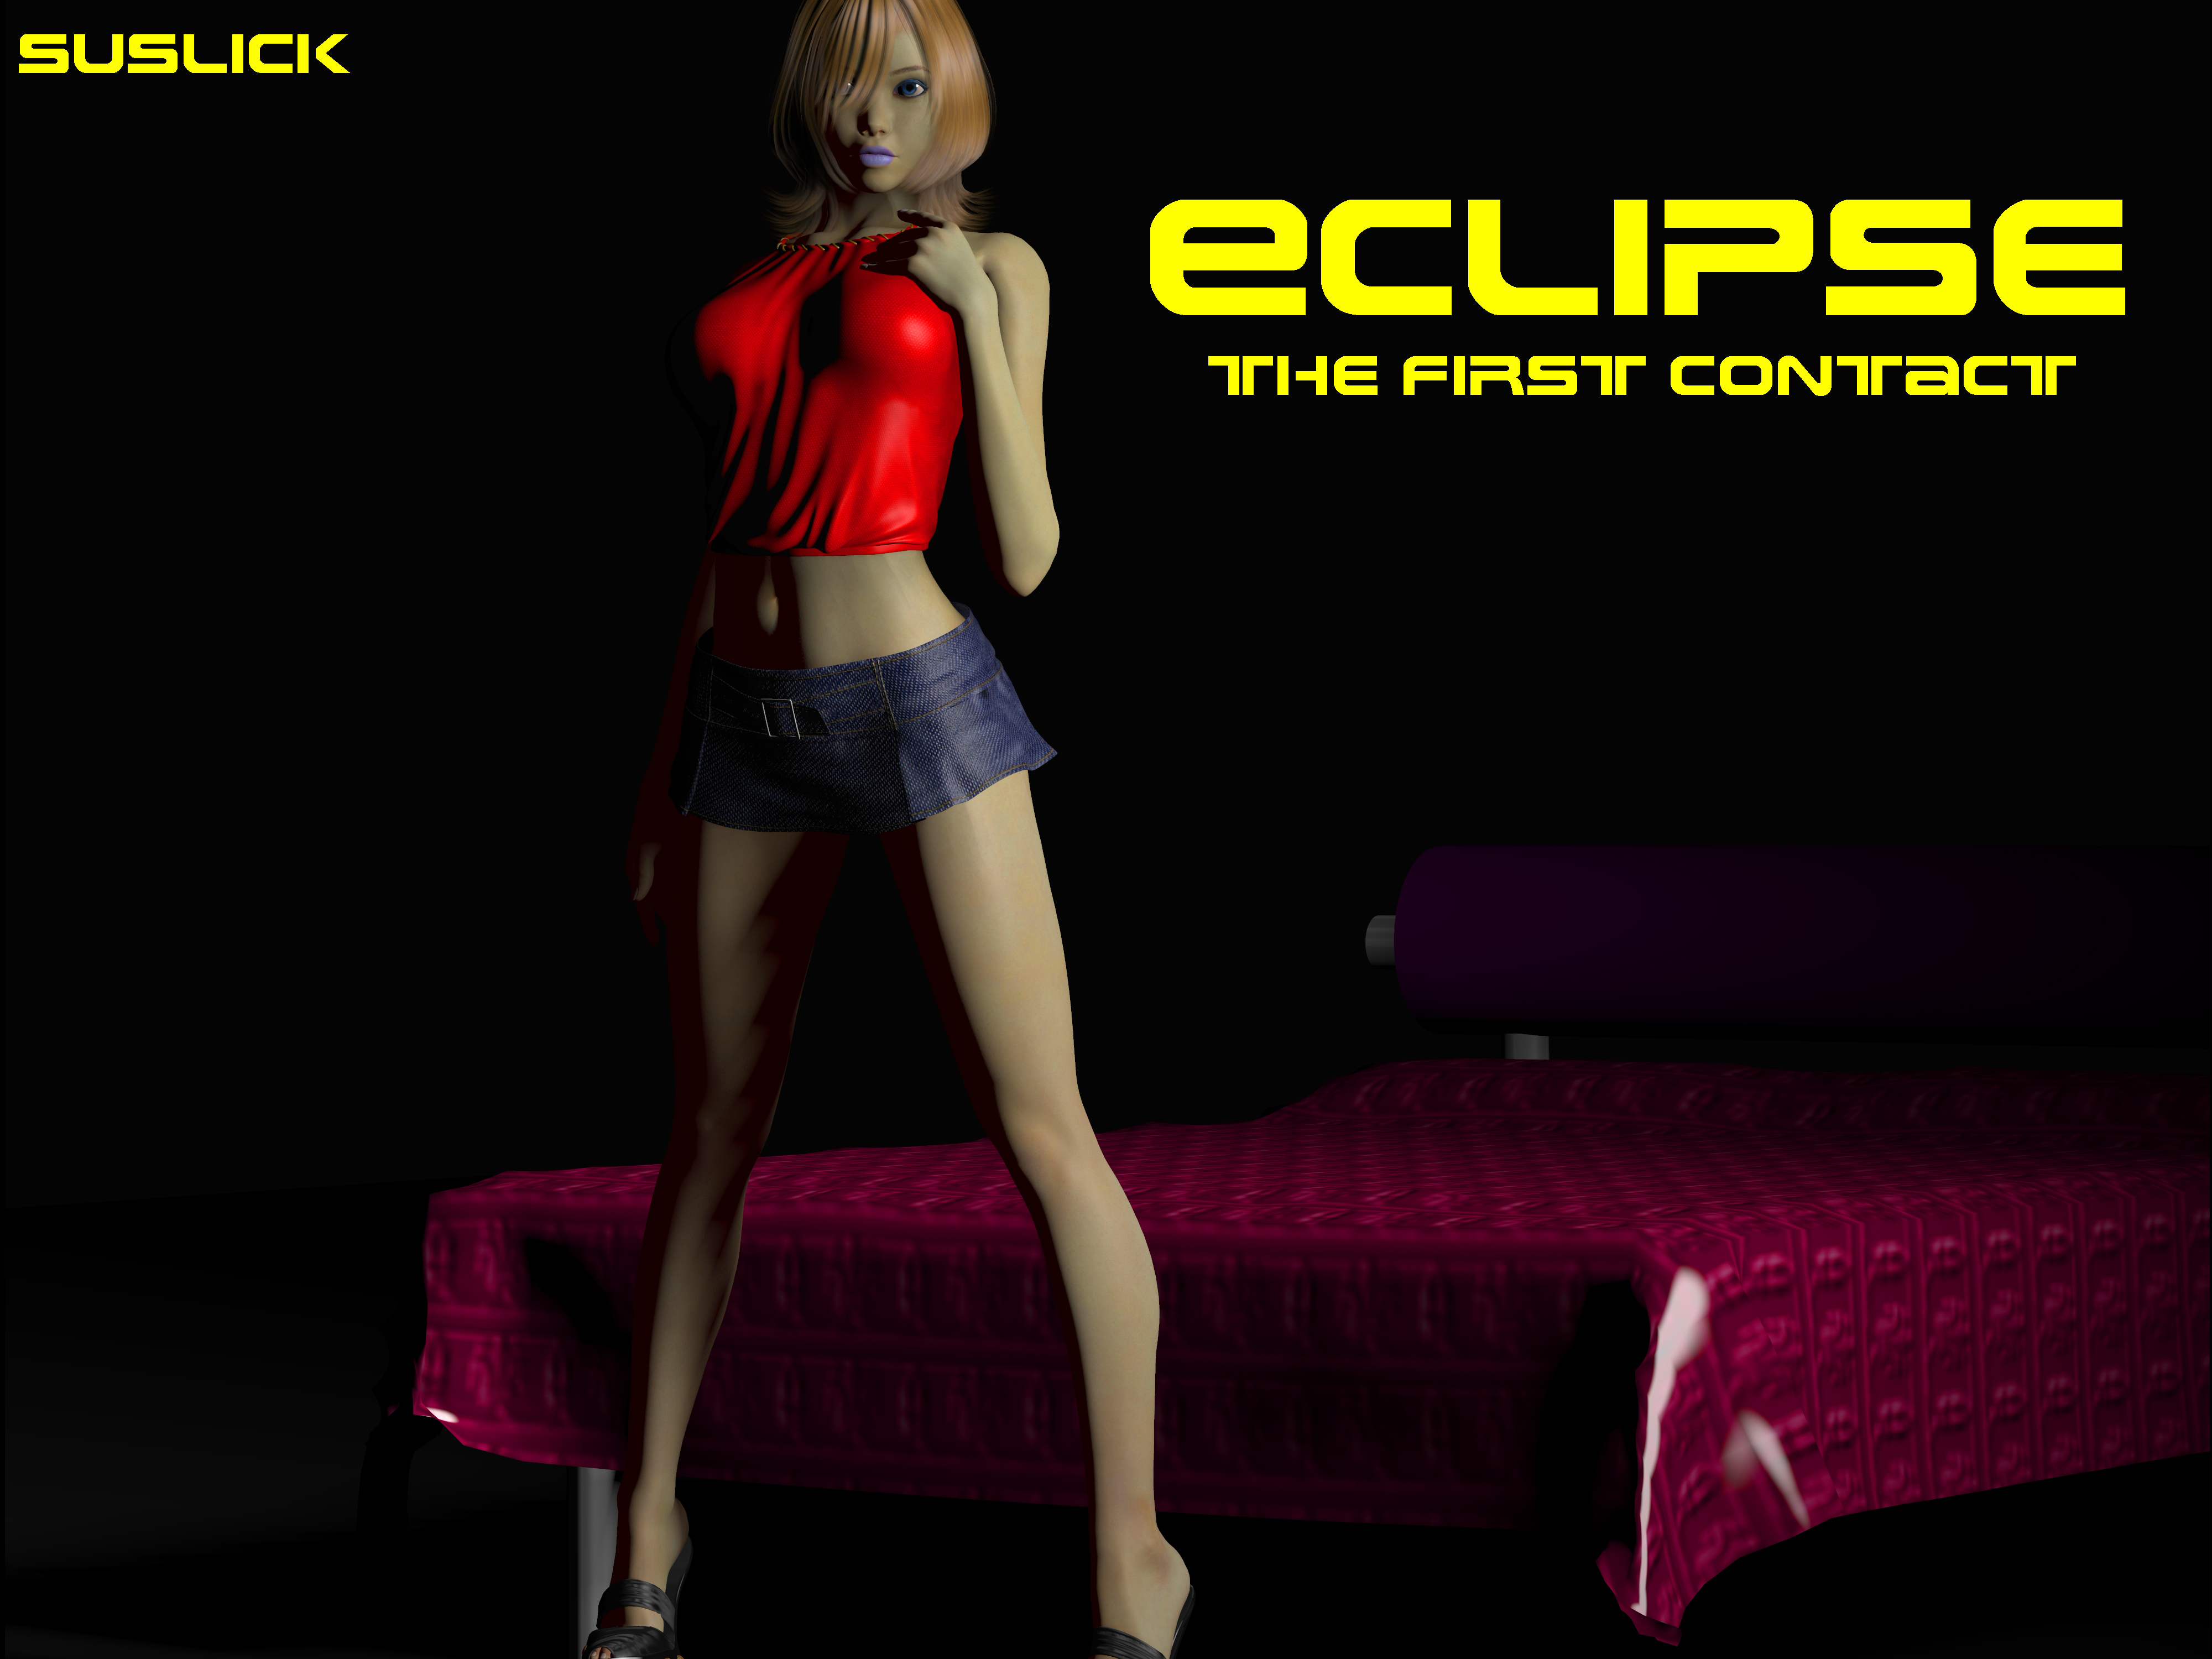 Sex with alien in 3d comic - Eclipse The First Contact from Suslick